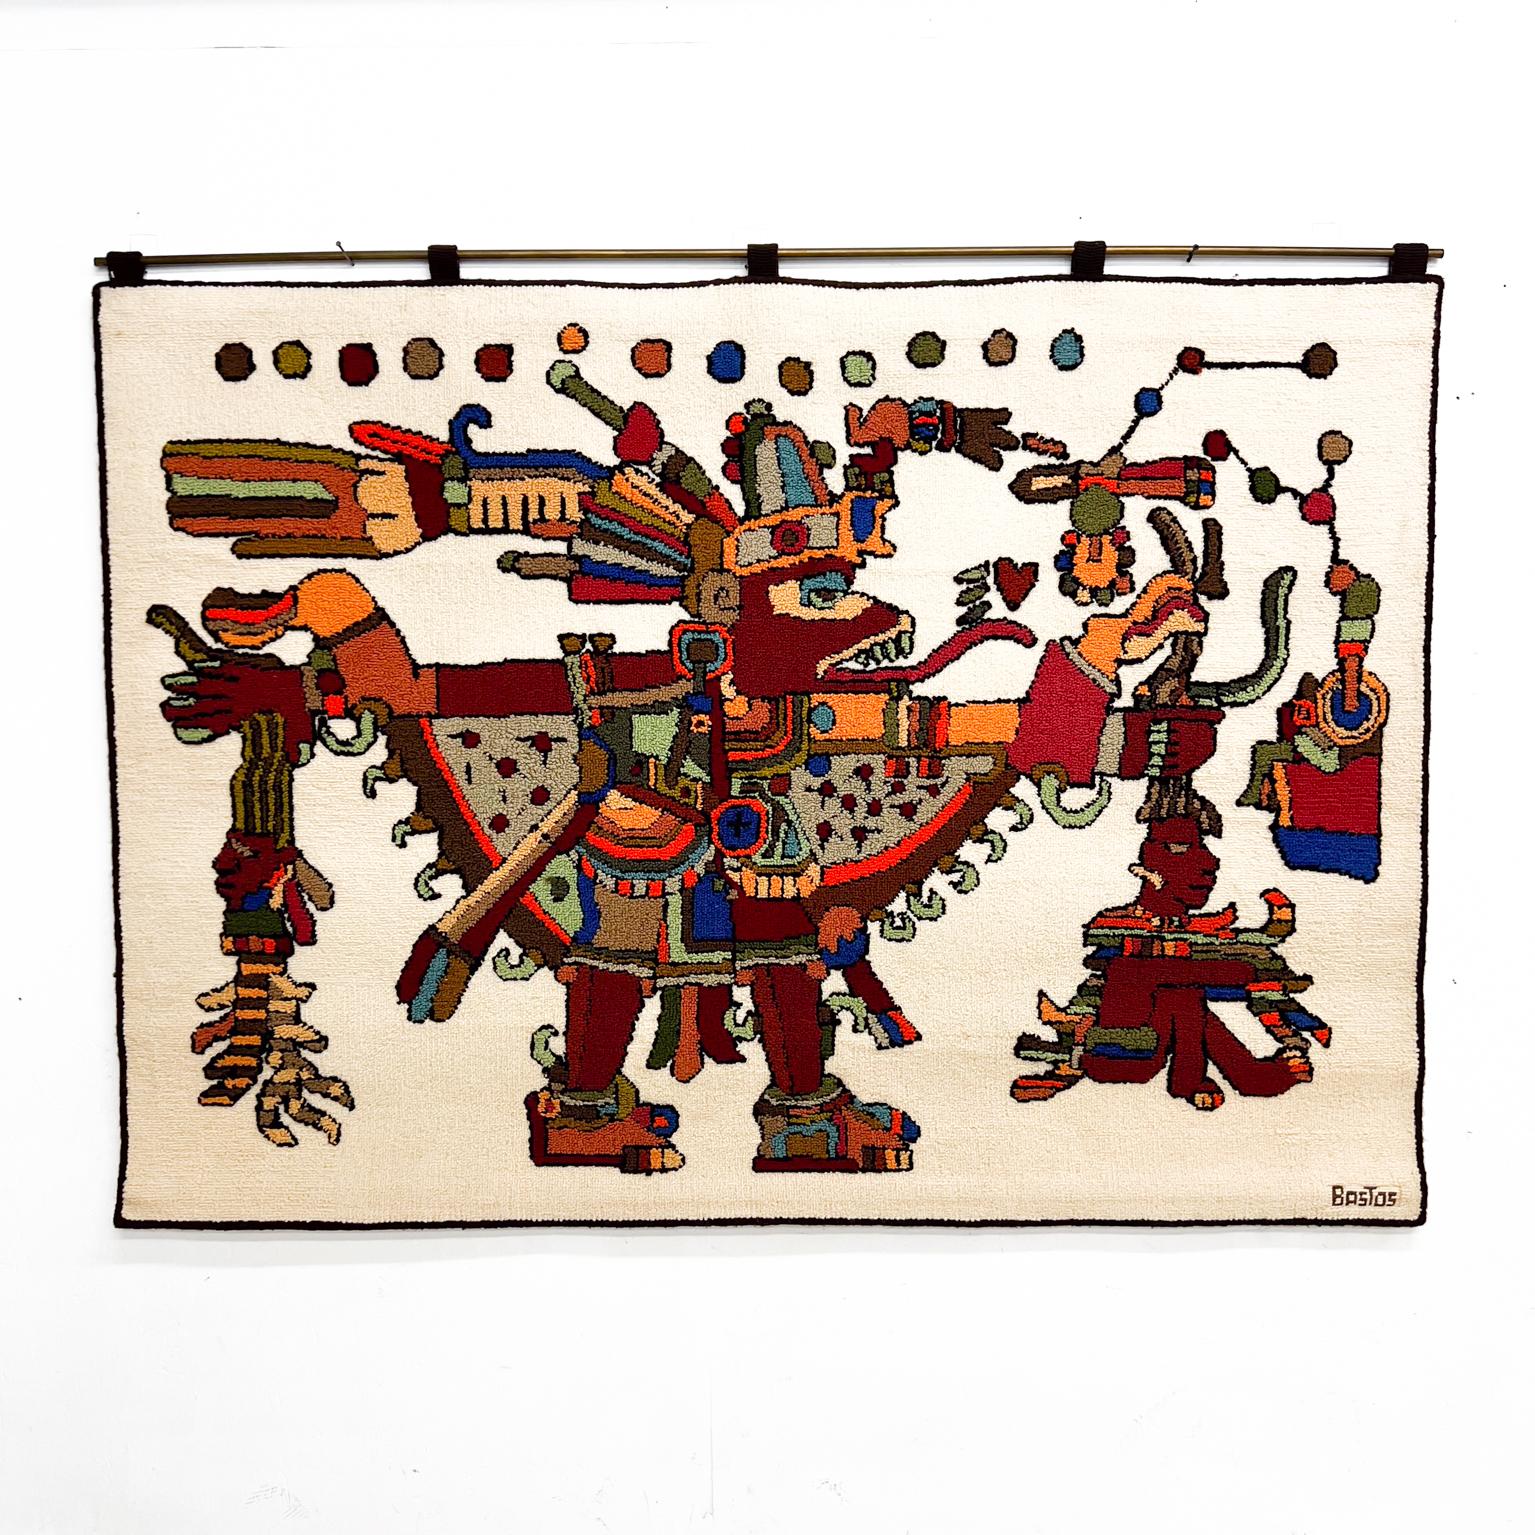 Brazilian Artist Carlos Frederico Bastos 
Fine Wall Art Tapestry
Signed
71 w x 53.5 h 
Original vintage preowned condition
Please refer to images provided.